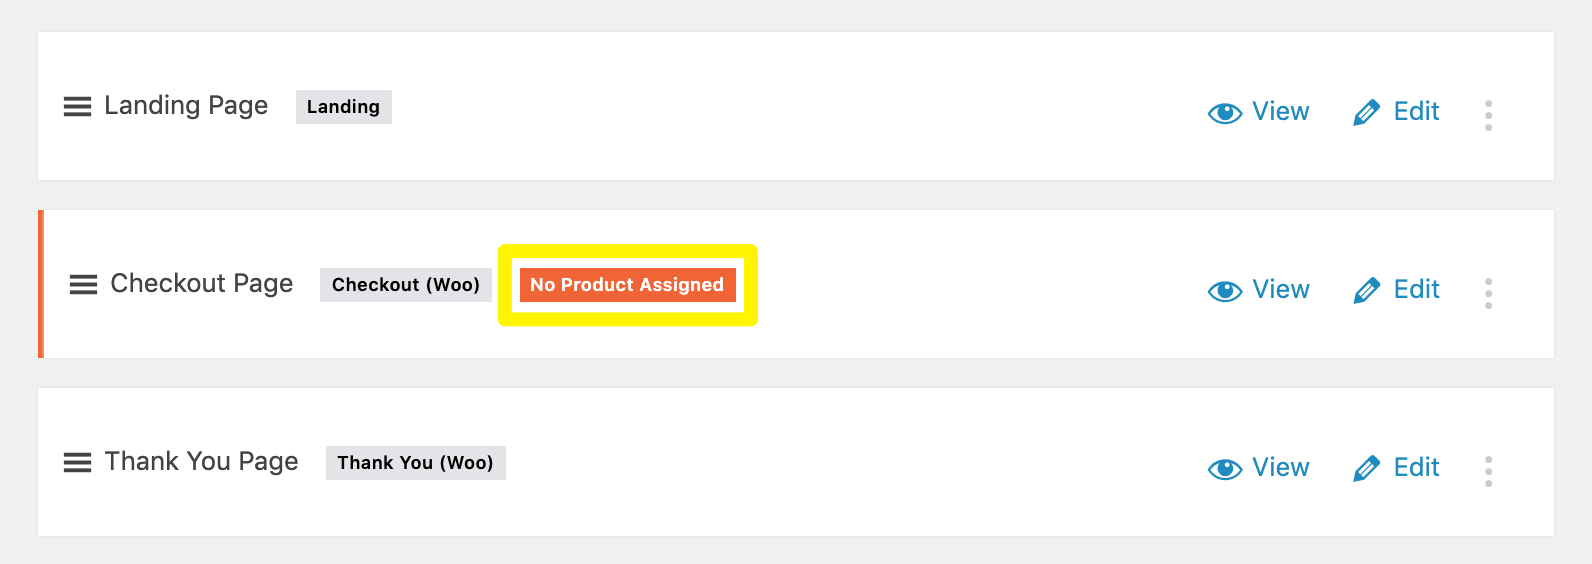 Cartflows中Checkout页面上的No Product Assigned标签。